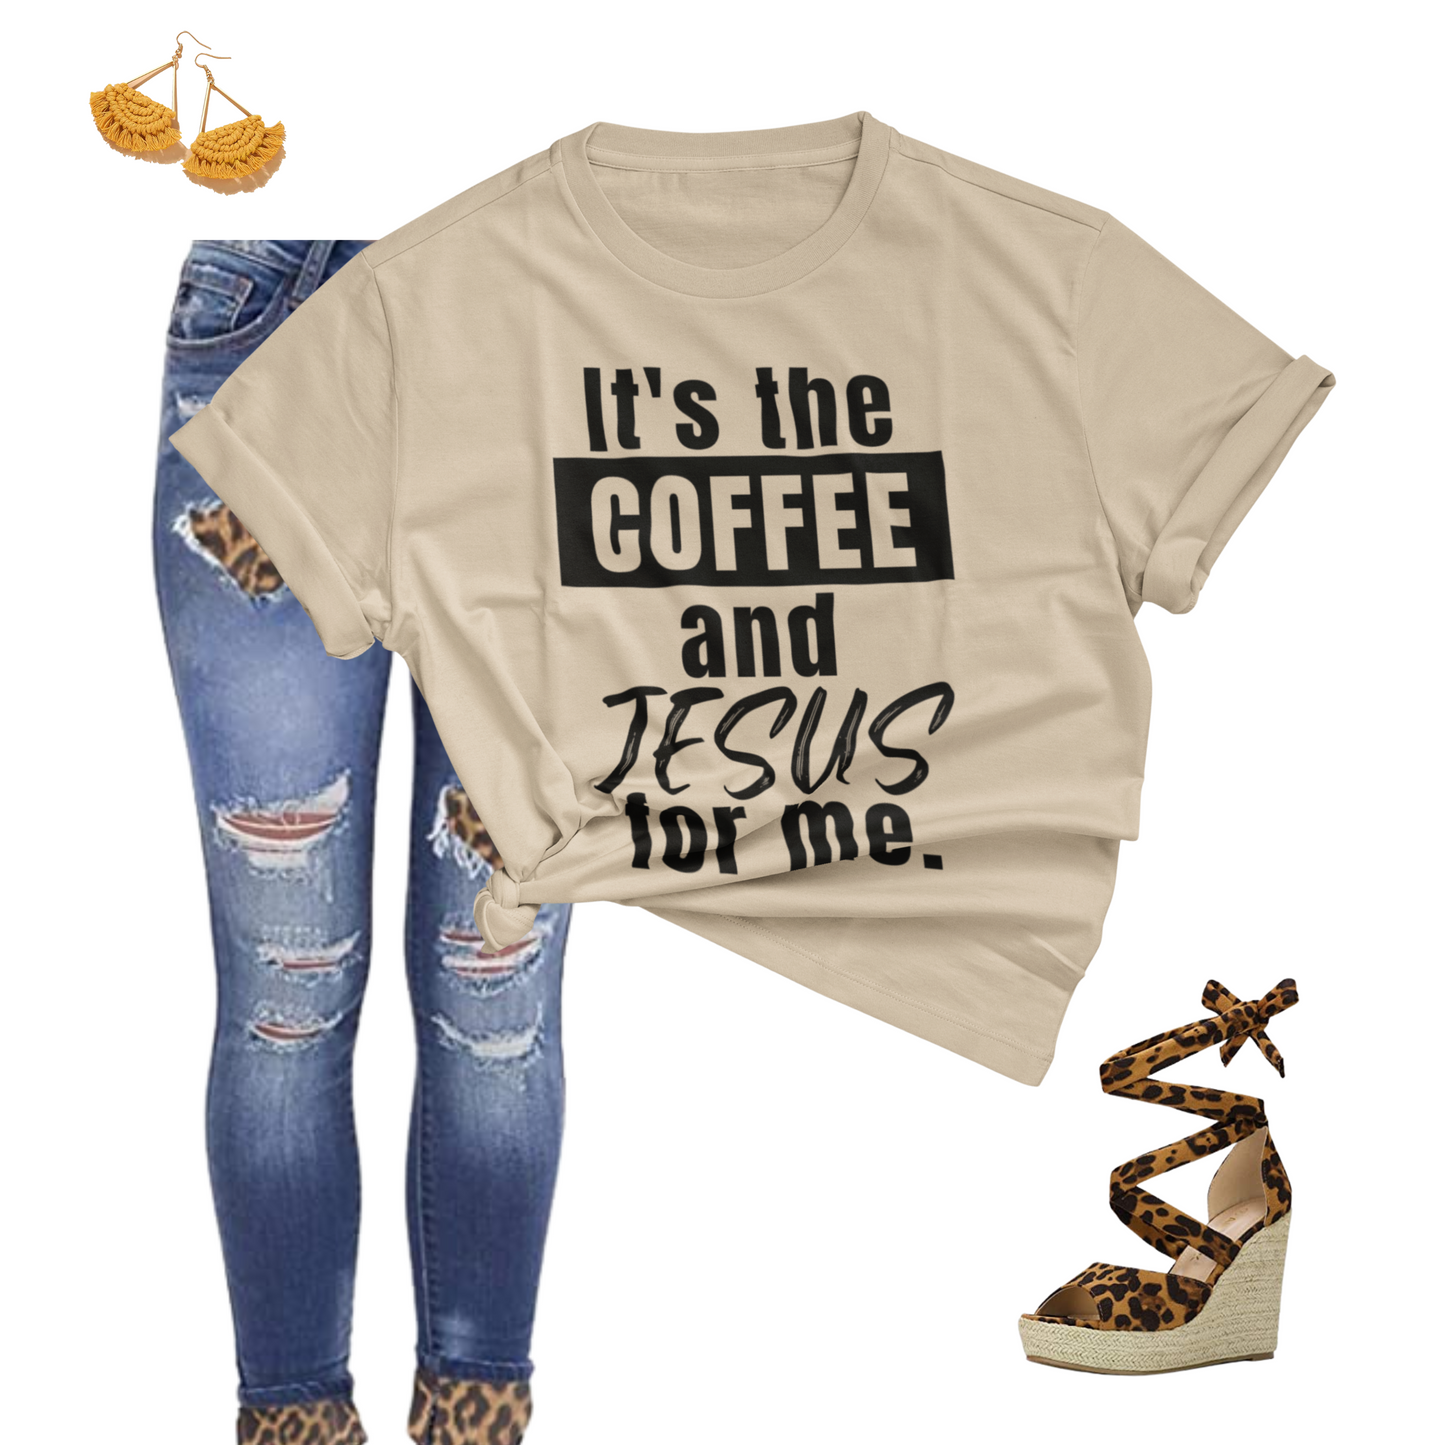 Stylish tan 'It's the Coffee and Jesus for Me' T-shirt from Triumph Tees. This faith-inspired apparel is perfect for those who love coffee and spirituality, blending comfort and style.